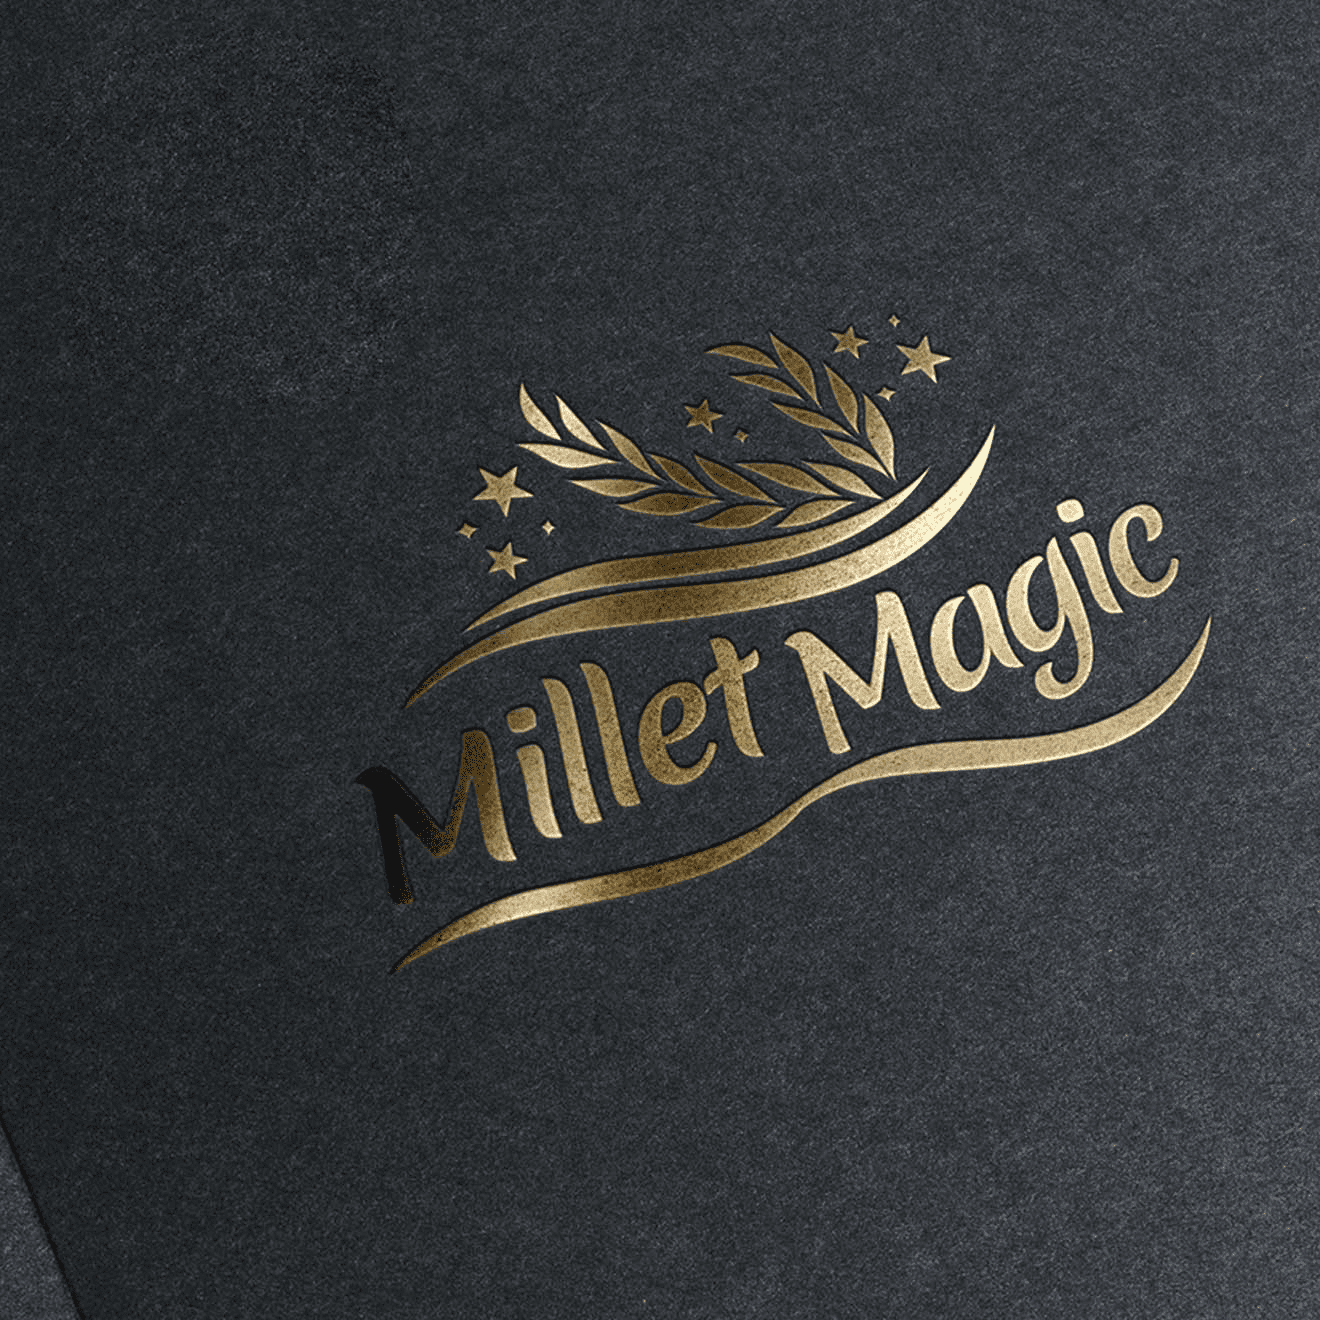 Millet Magic Gold Foil Graphic Design, Branding Packaging Design in Chennai by Creative Prints thecreativeprints